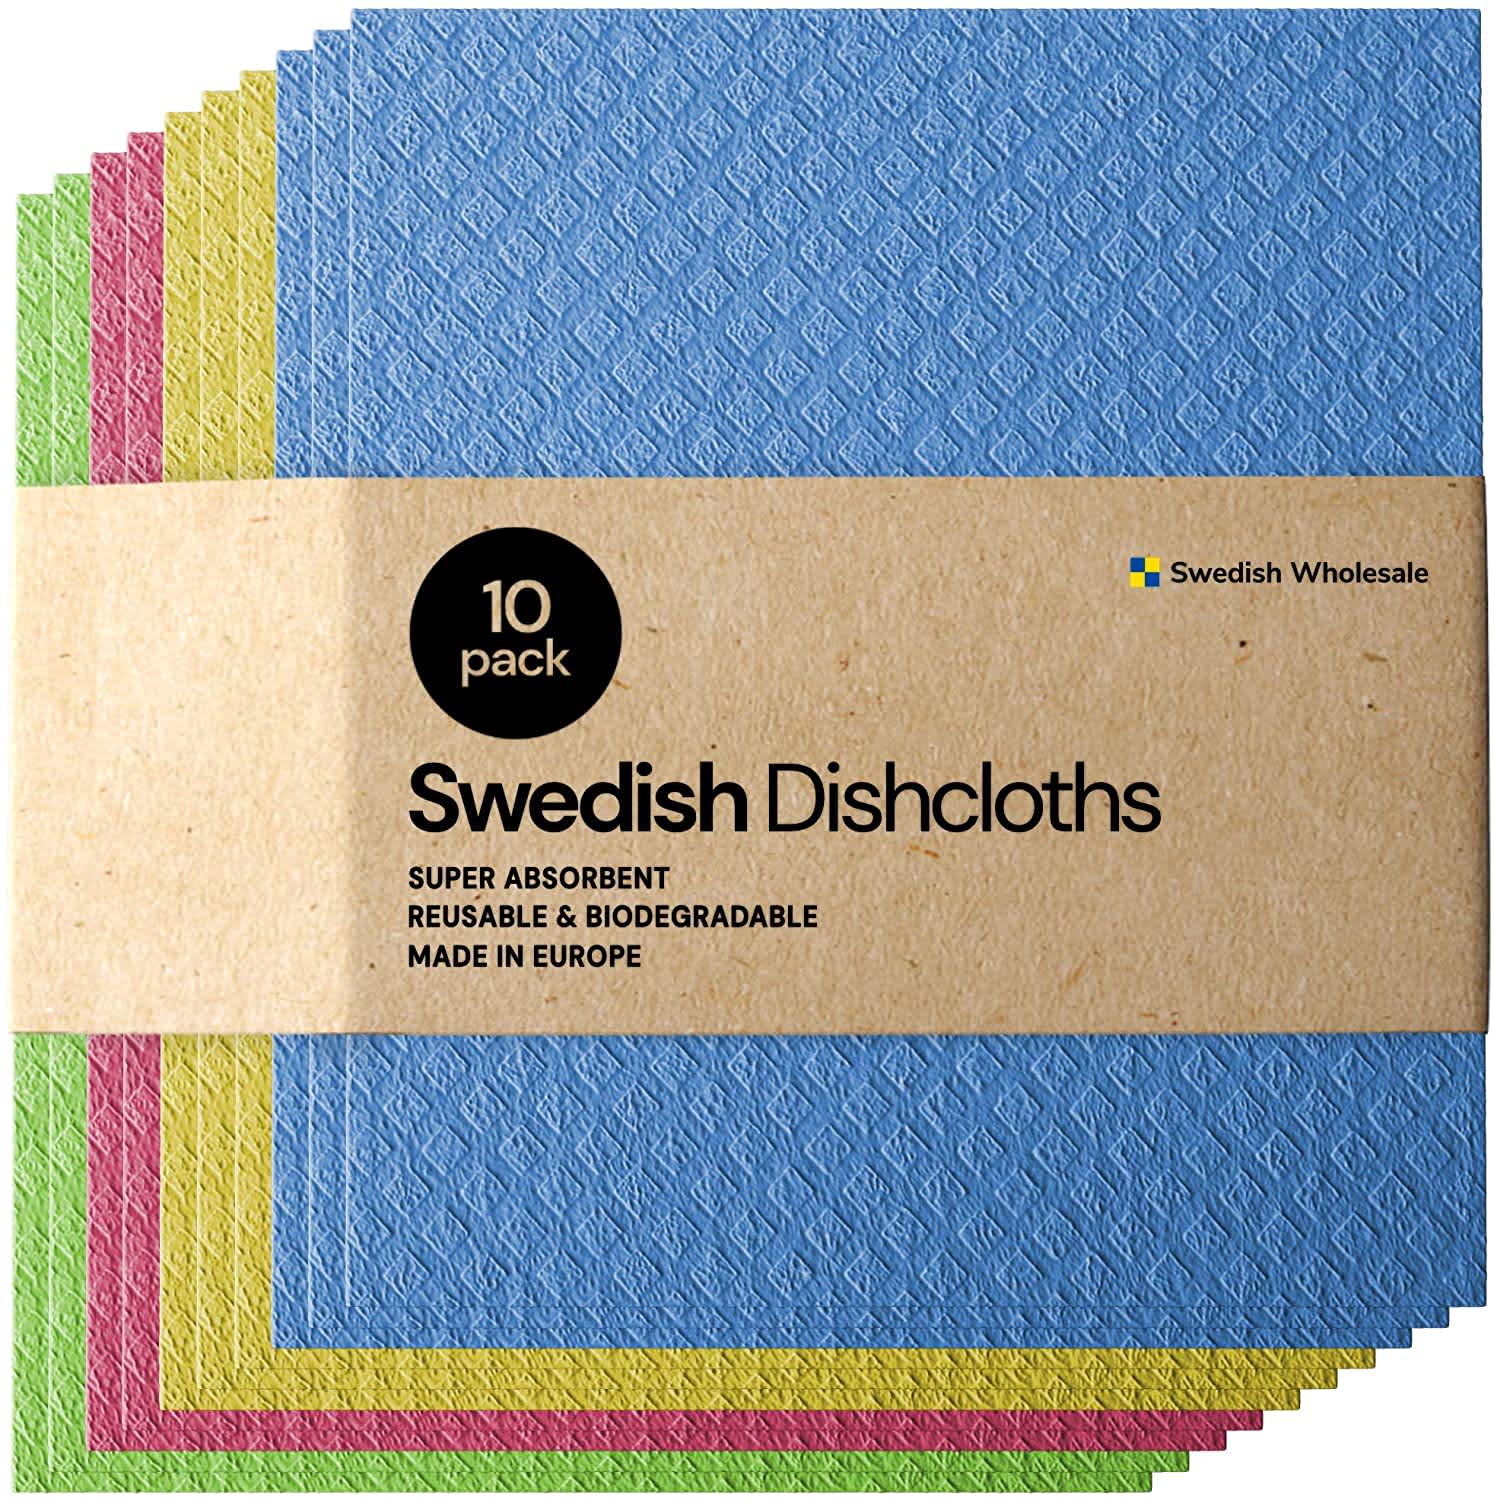 Swededishcloths Swedish Dishcloth (Natural Color) Set of 5 Each Paper Towel Replacements Eco Friendly Reusable Absorbent Cleaning Sponge Cloths